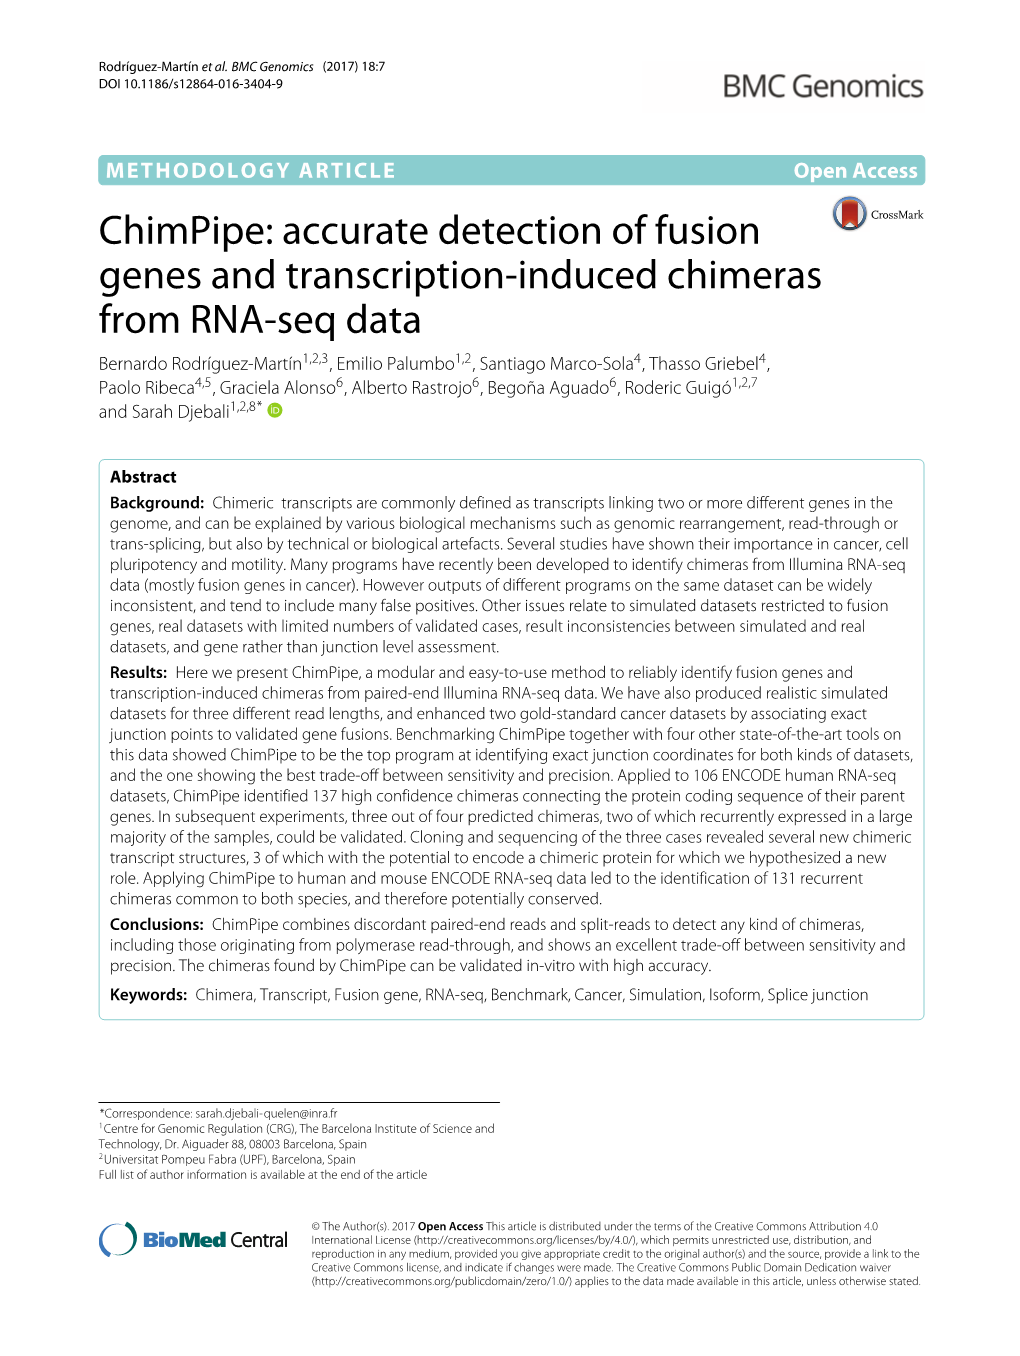 Chimpipe: Accurate Detection of Fusion Genes and Transcription